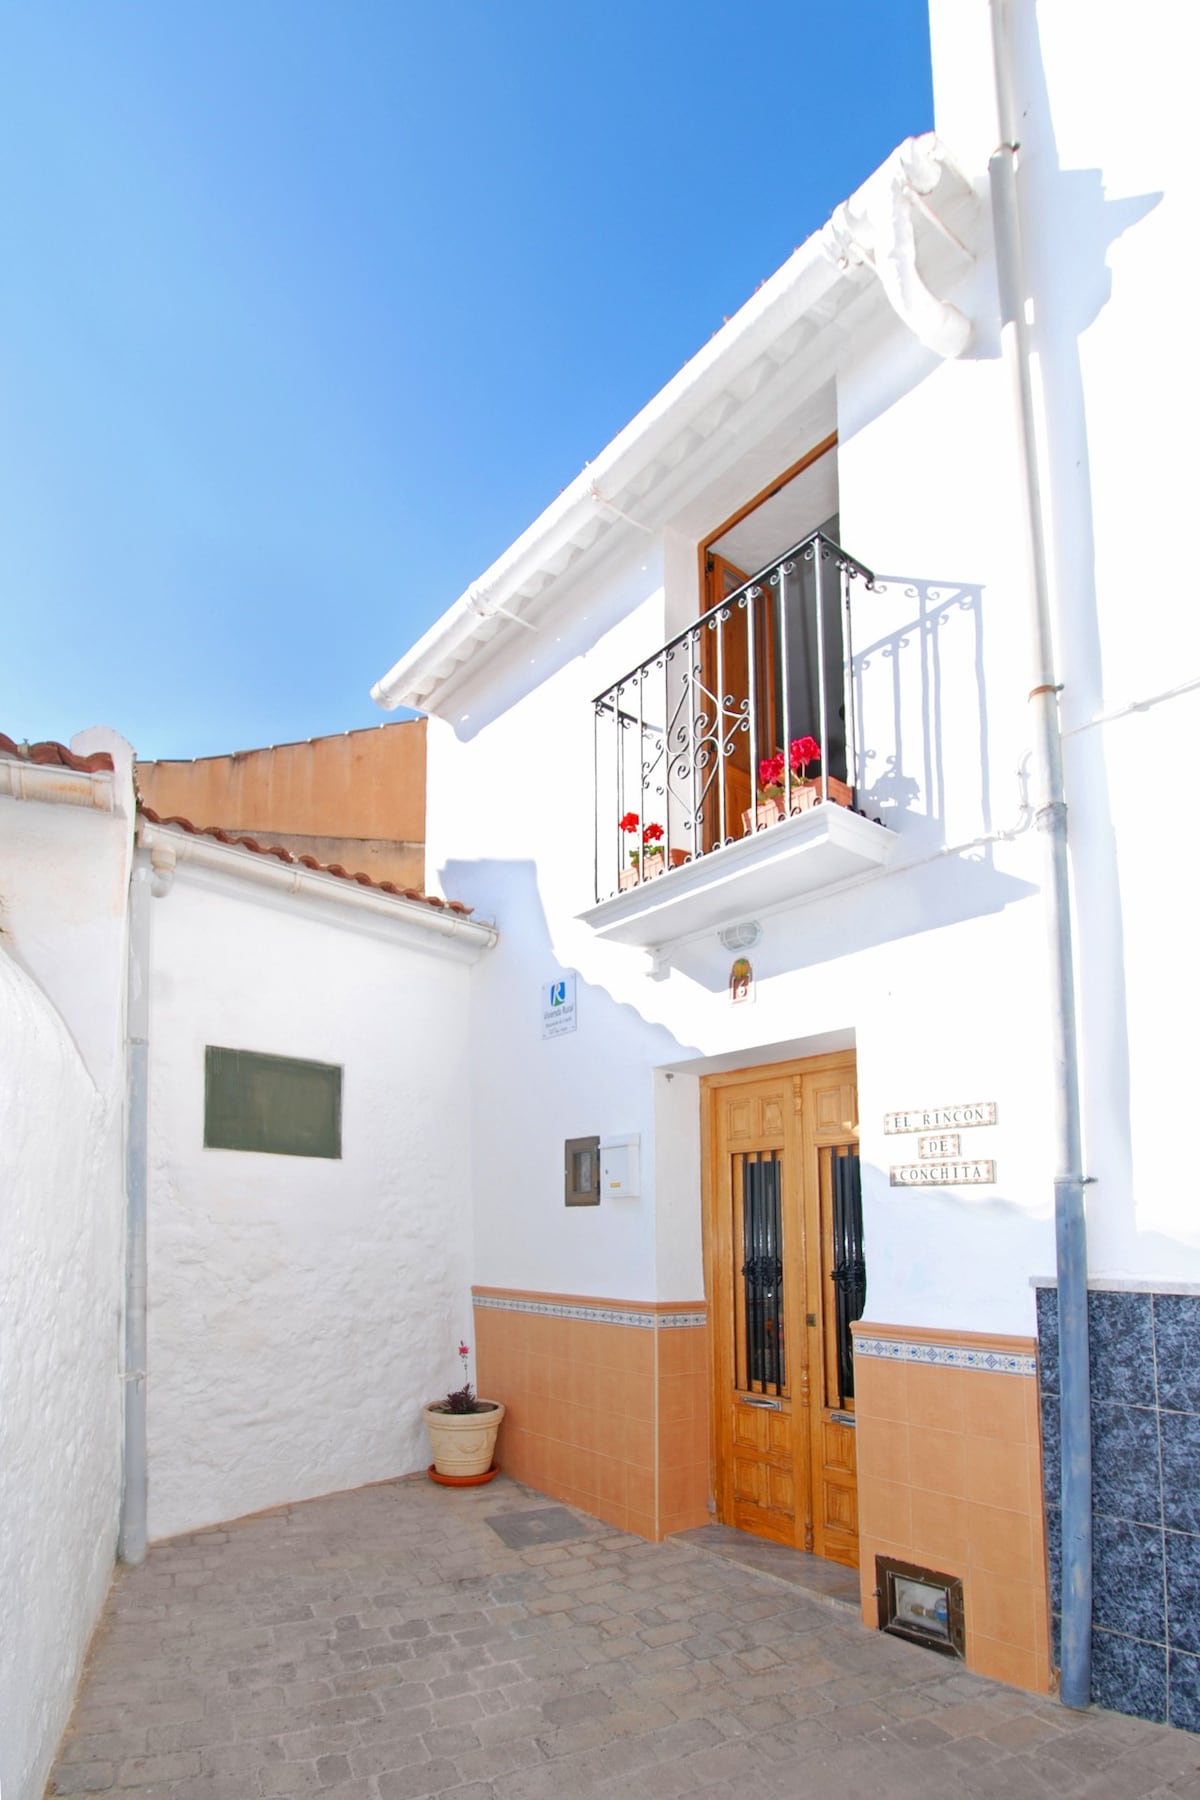 Cosy village house in Periana. Discover Andalusia.